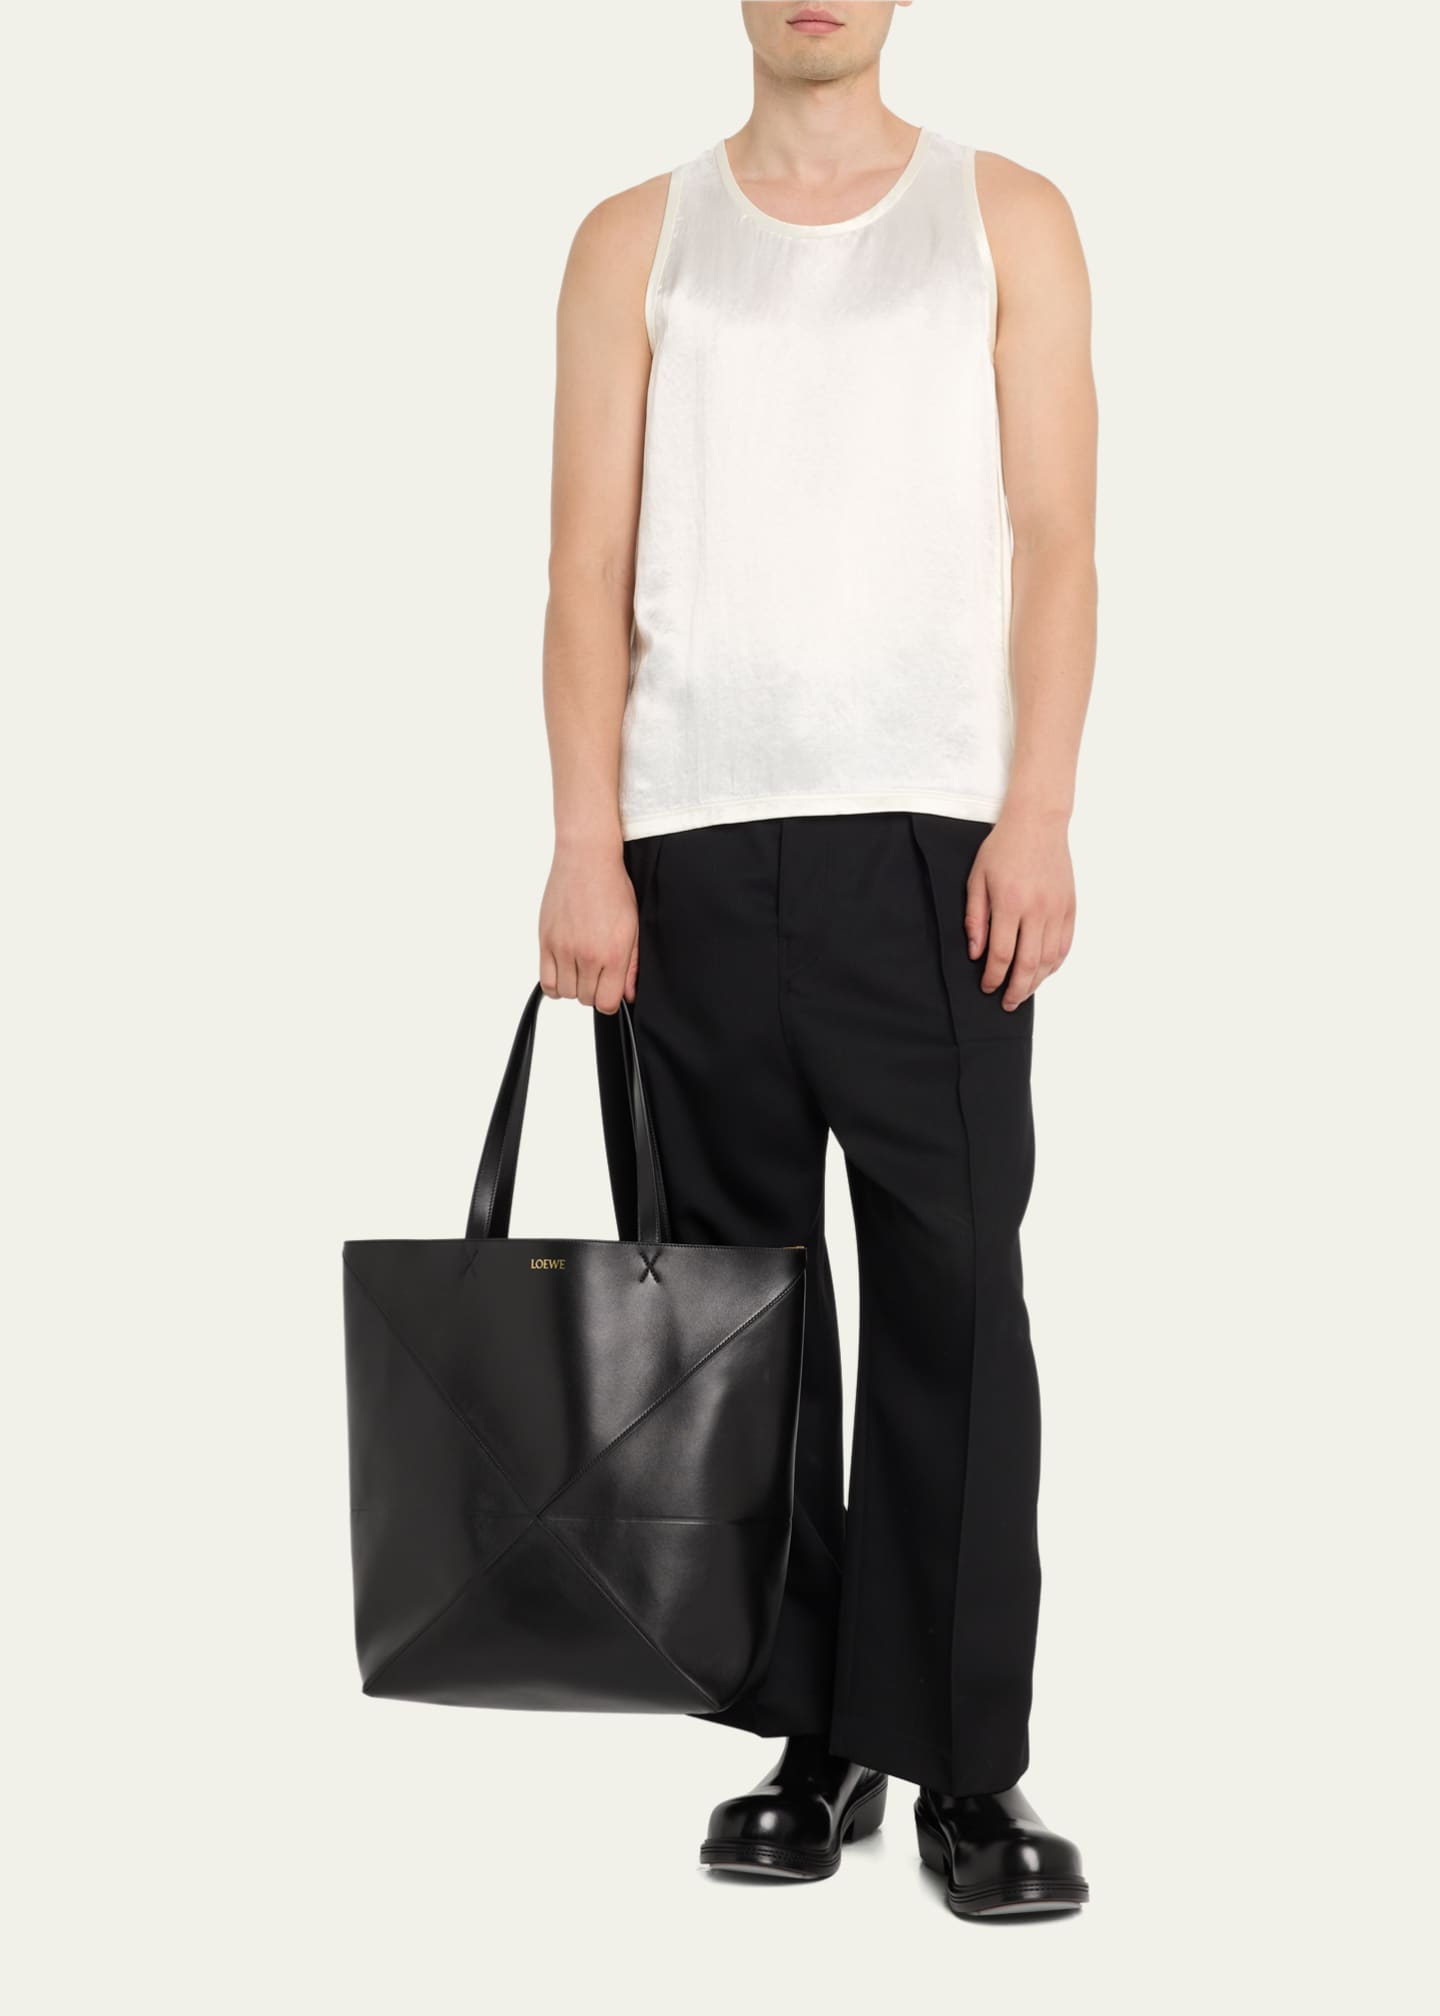 Loewe Puzzle Fold Large Tote Bag in Shiny Leather - Bergdorf Goodman